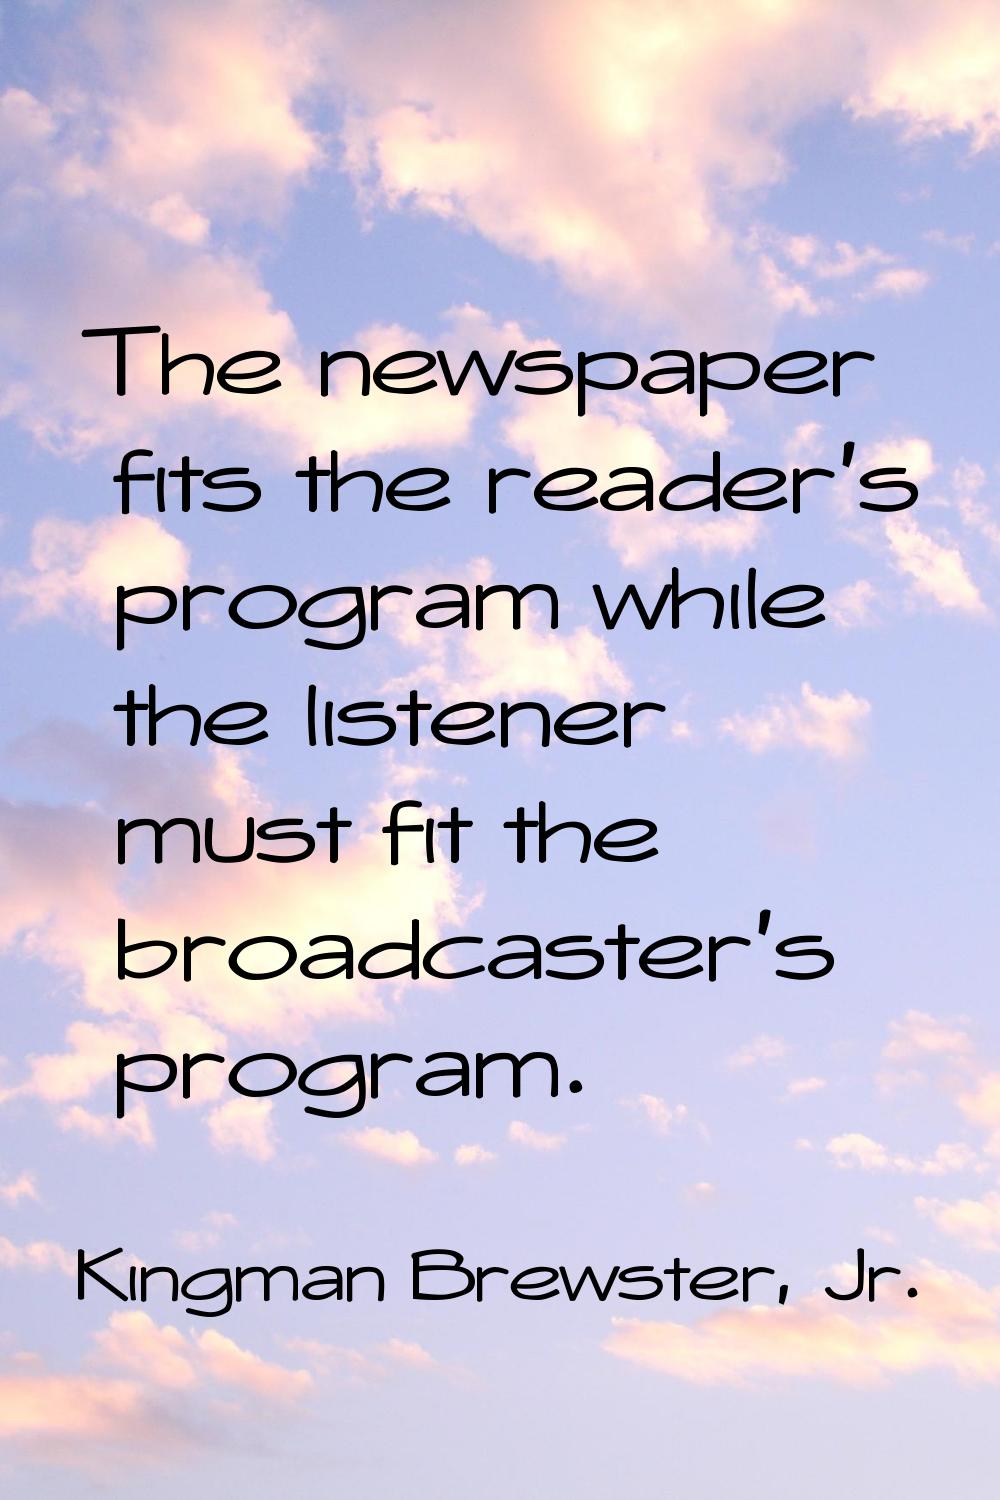 The newspaper fits the reader's program while the listener must fit the broadcaster's program.